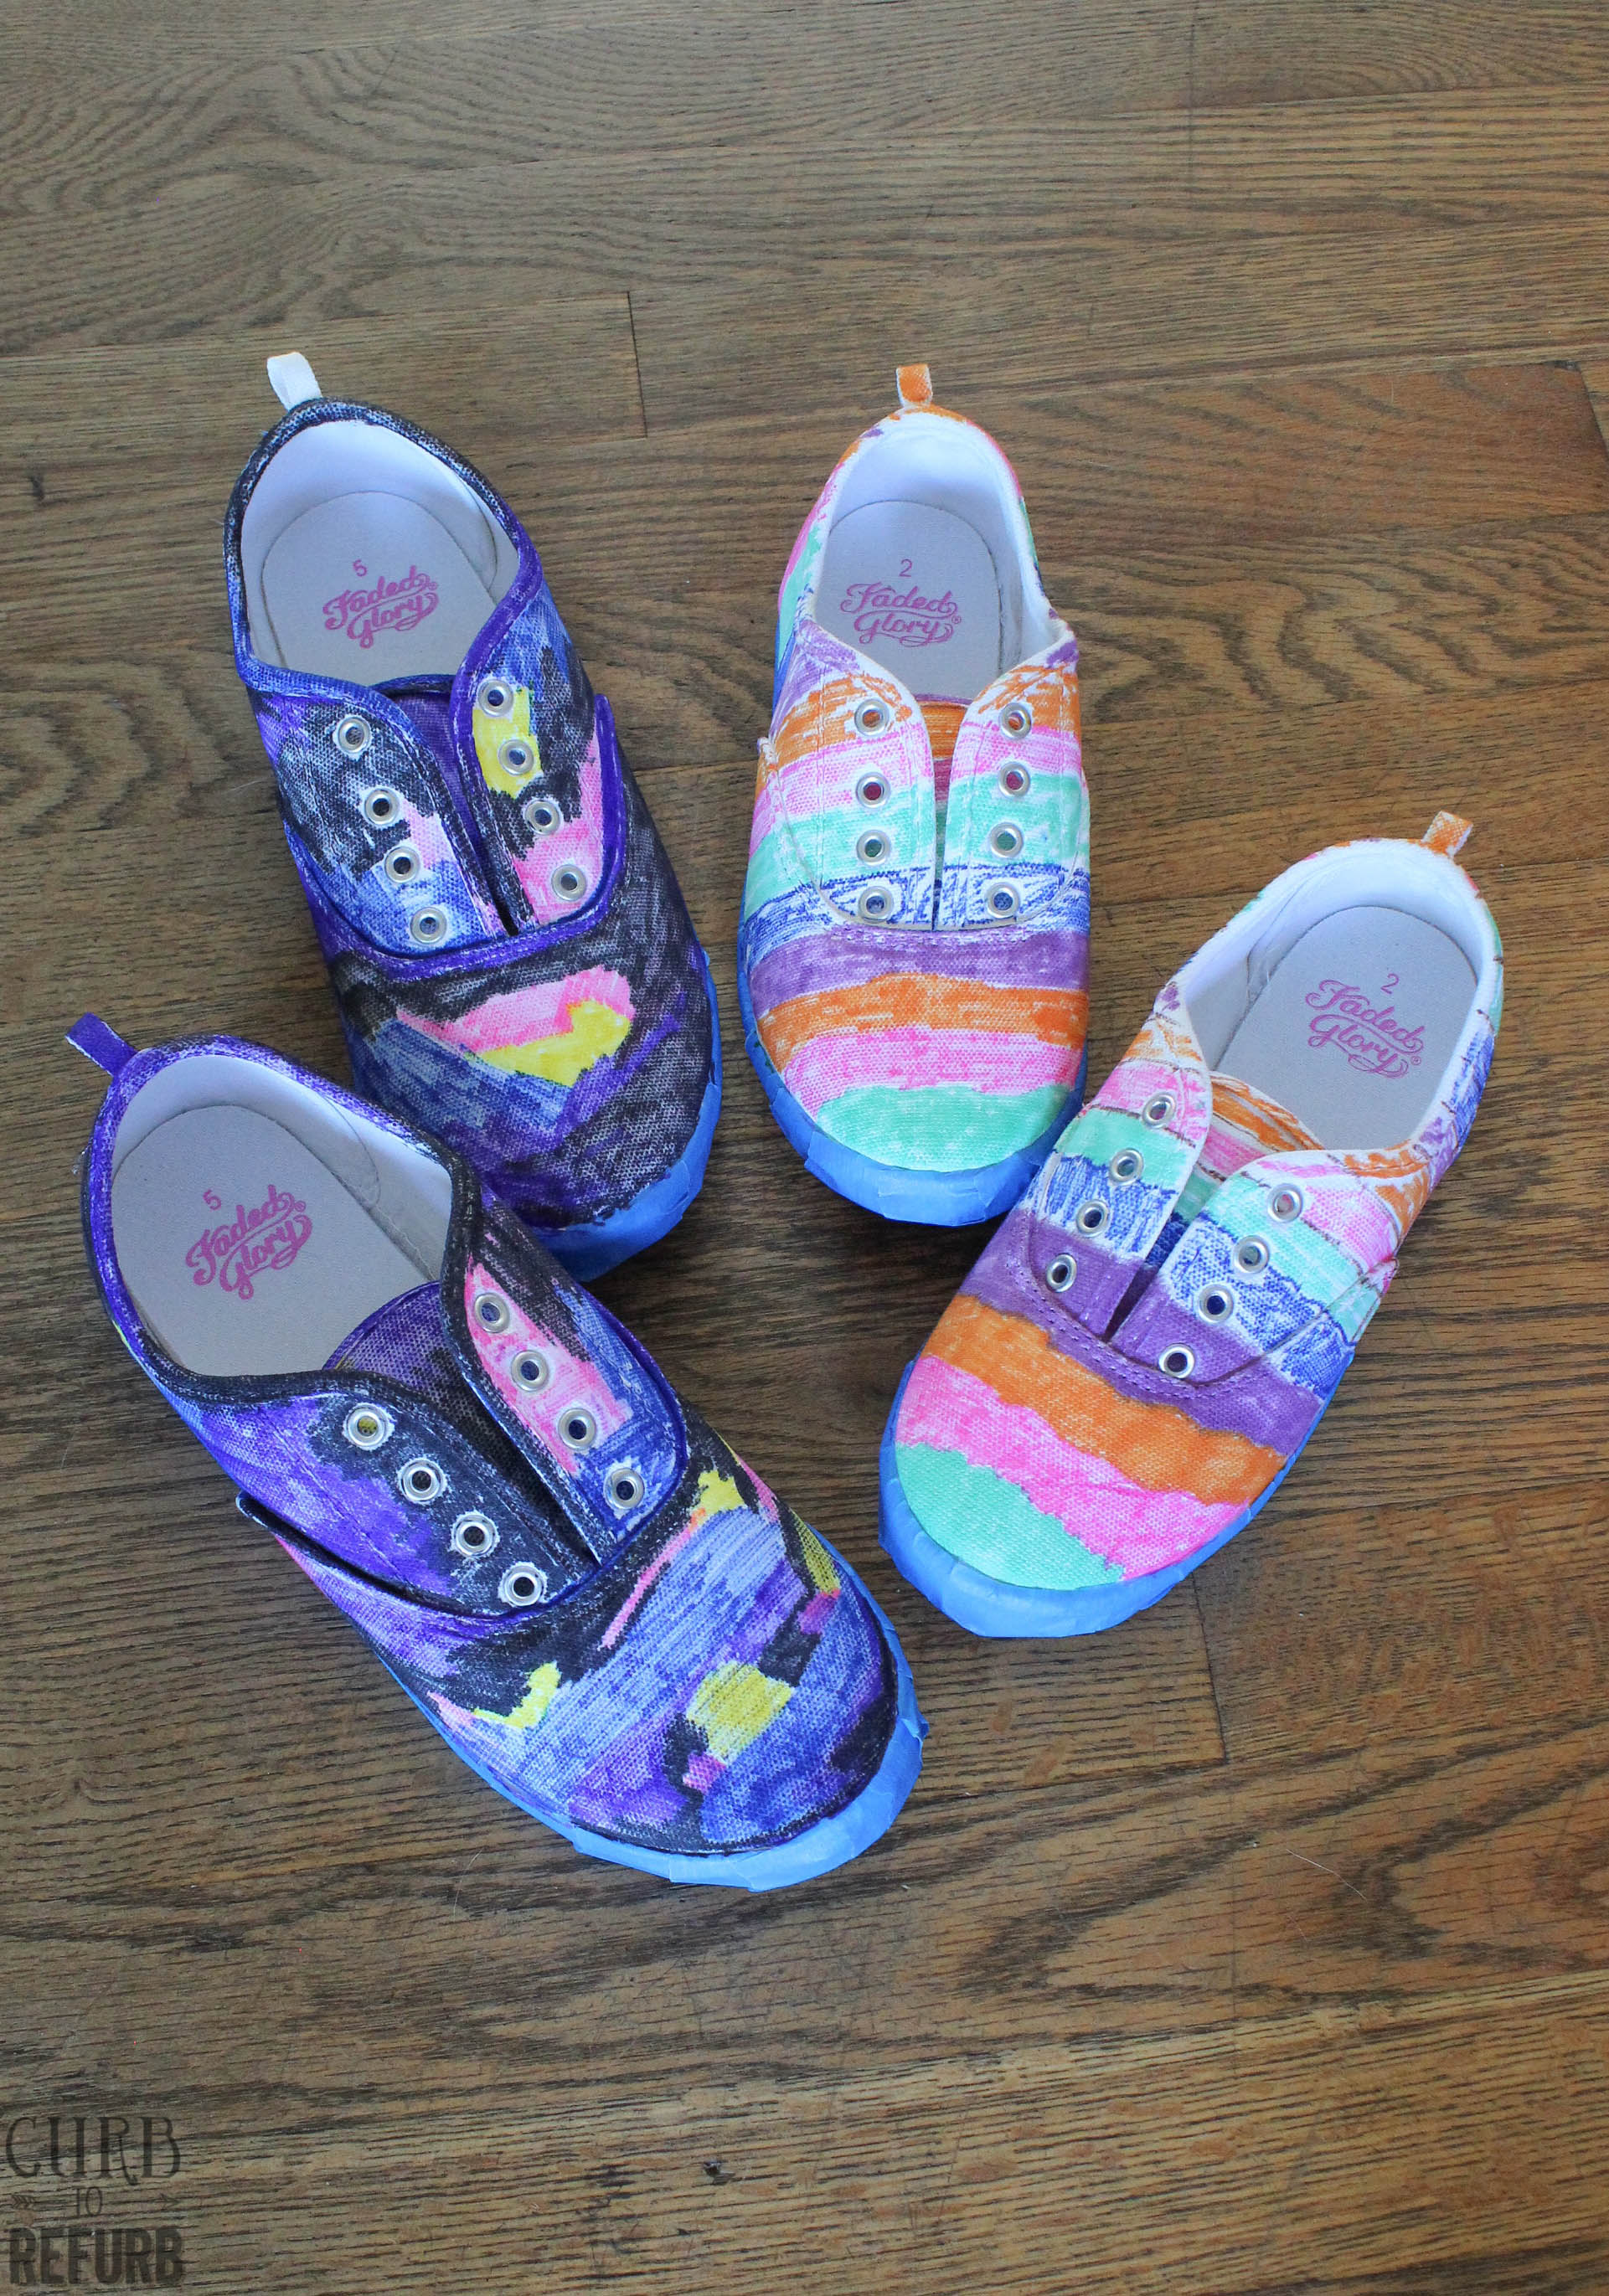 coloring shoes with sharpie